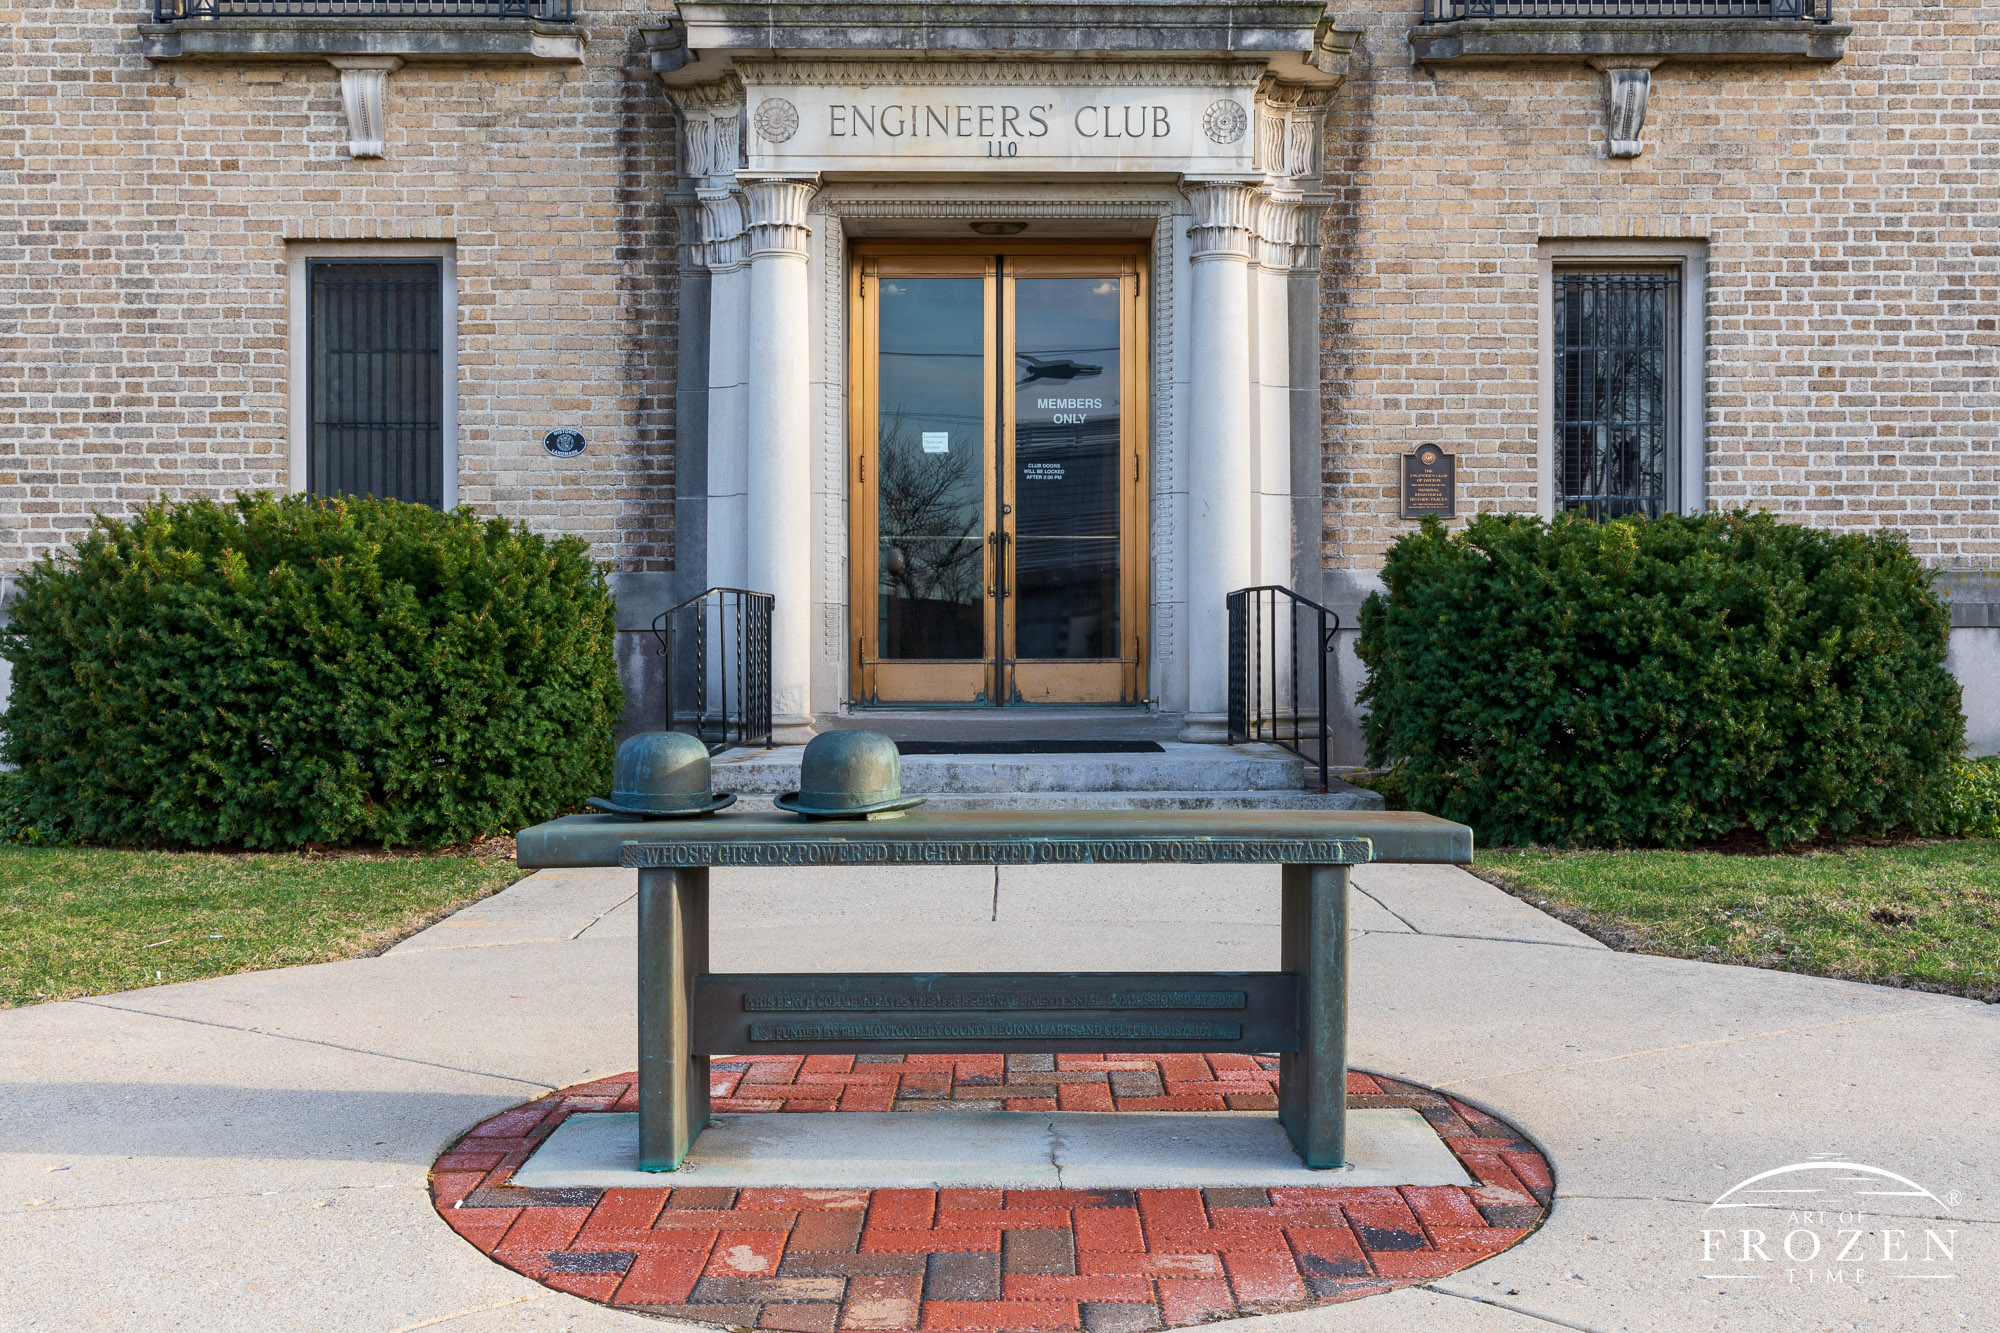 The front facade of the Engineers’ Club, Dayton Ohio along with one of 10 Wright Brothers Benches created by David Black